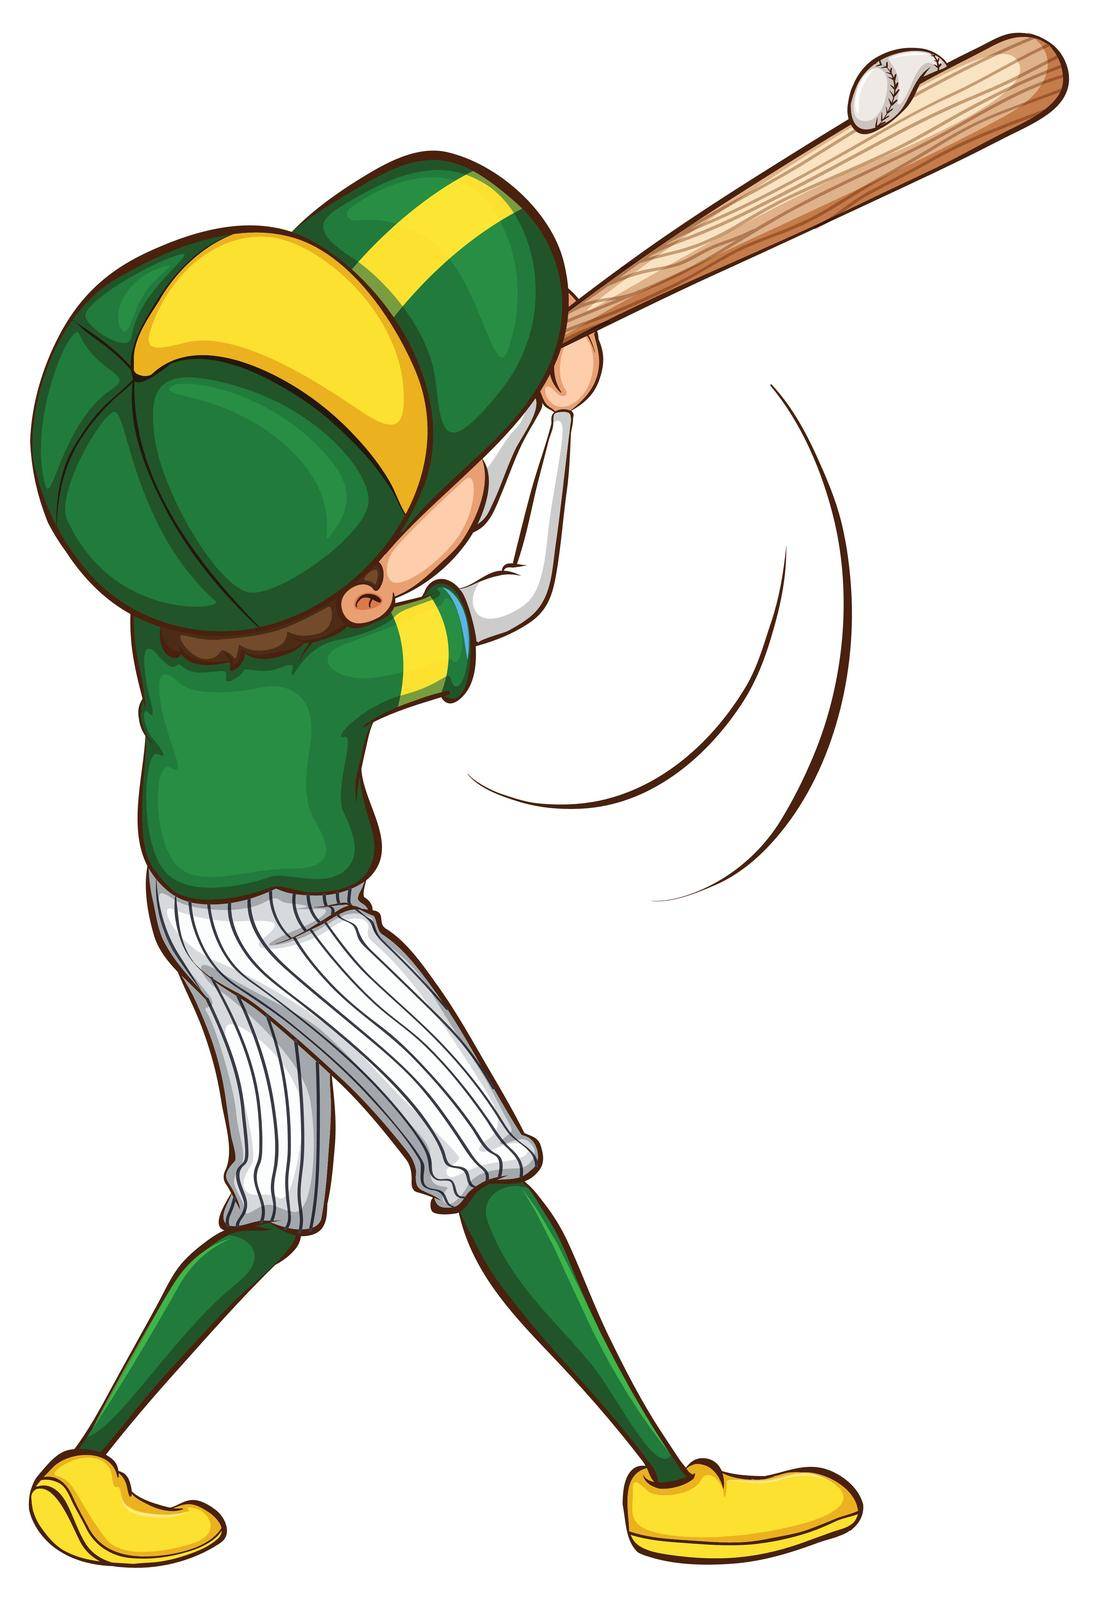 A sketch of a baseball player in green uniform by iimages